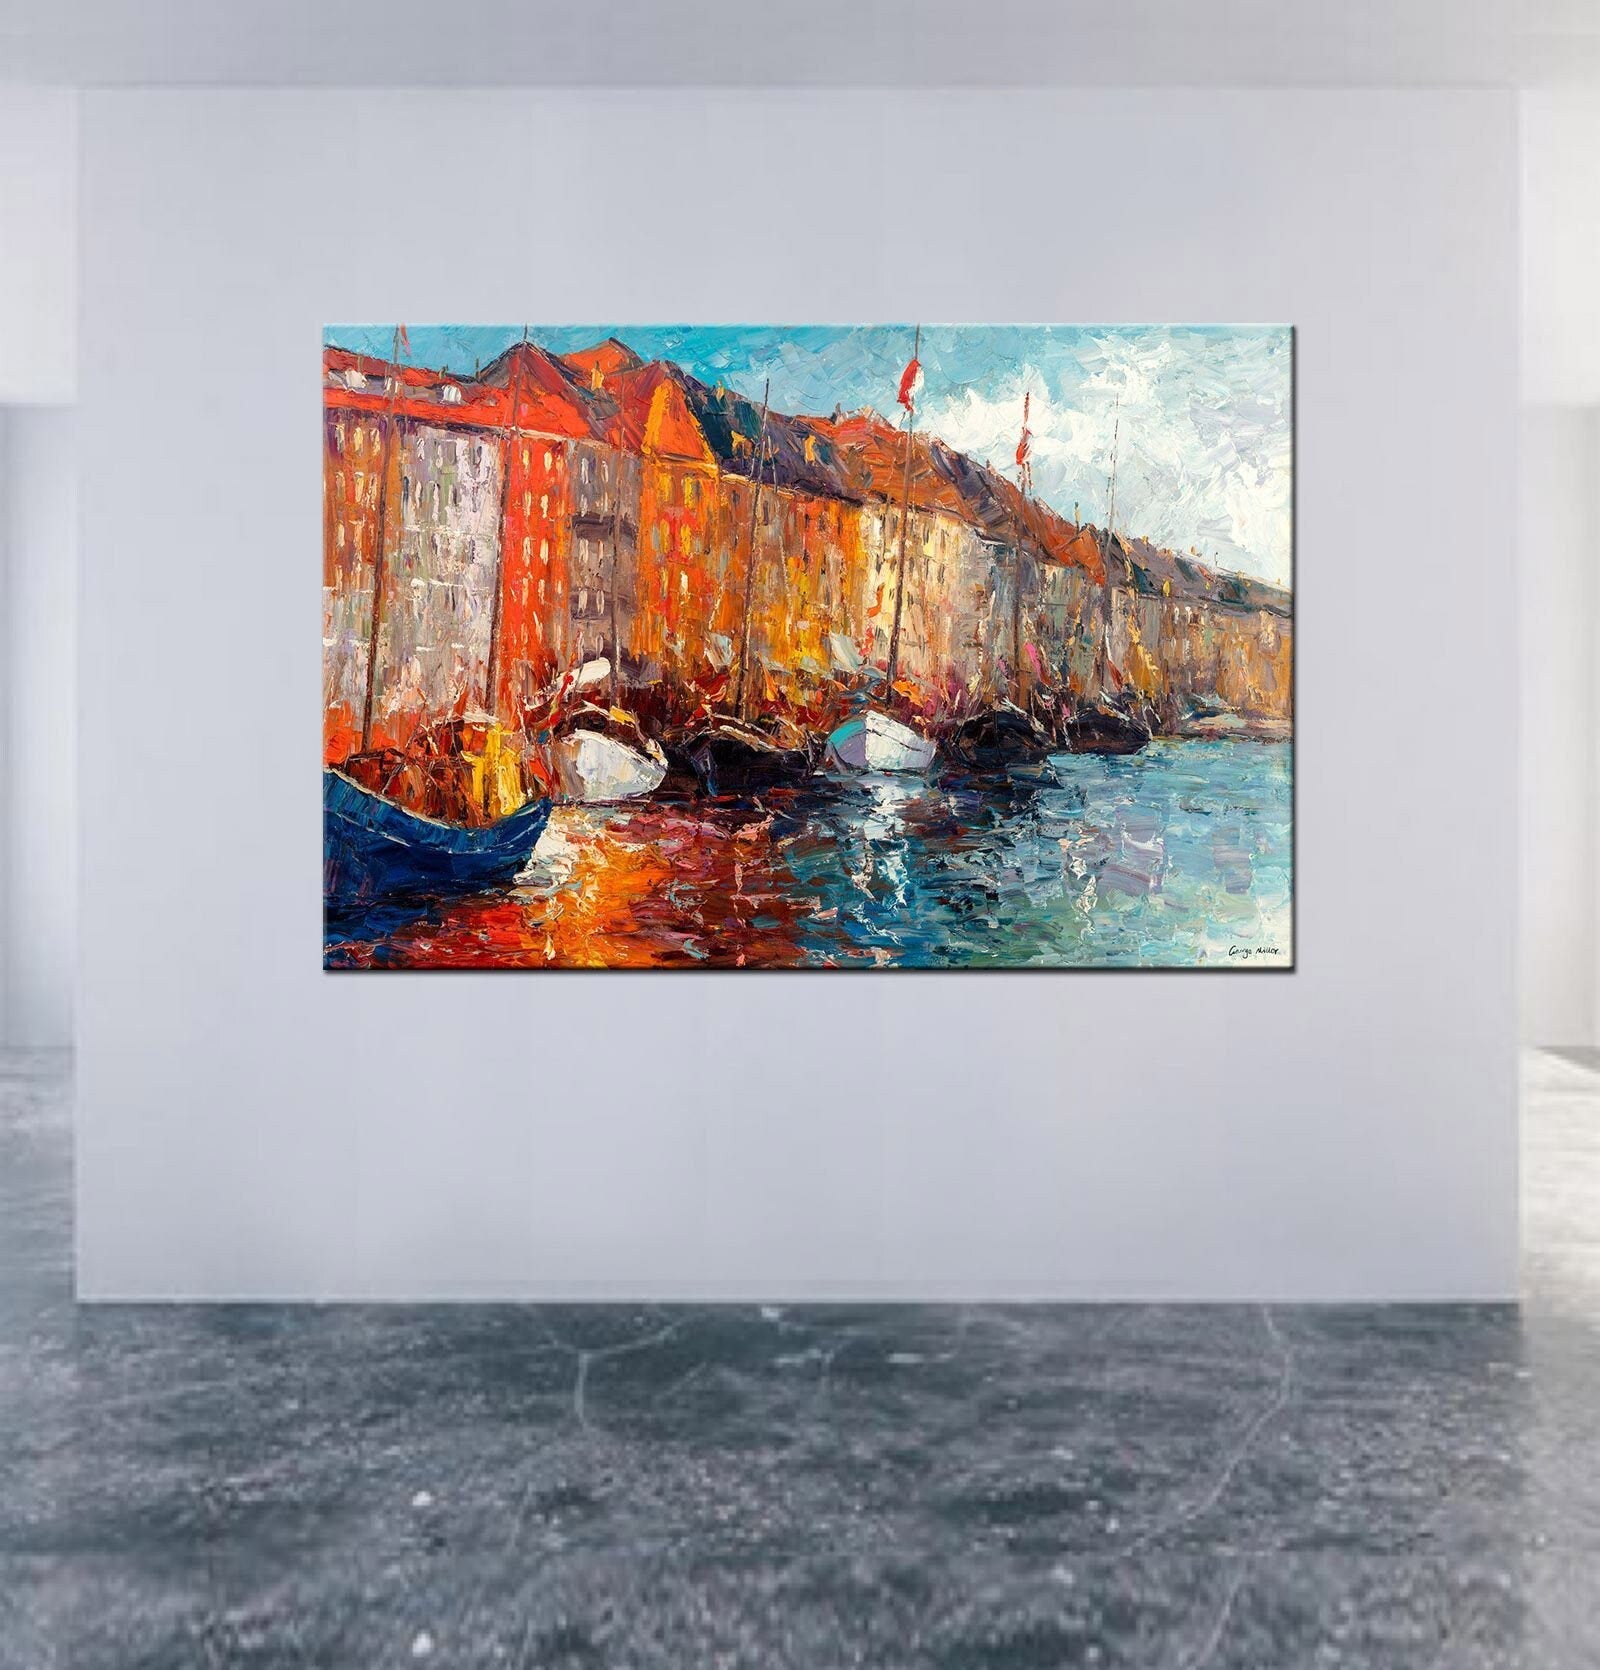 Oil Painting Amsterdam Canal Boats, Large Oil Painting, Original Abstract Art, Original Oil Painting Landscape, Oil Painting Abstract